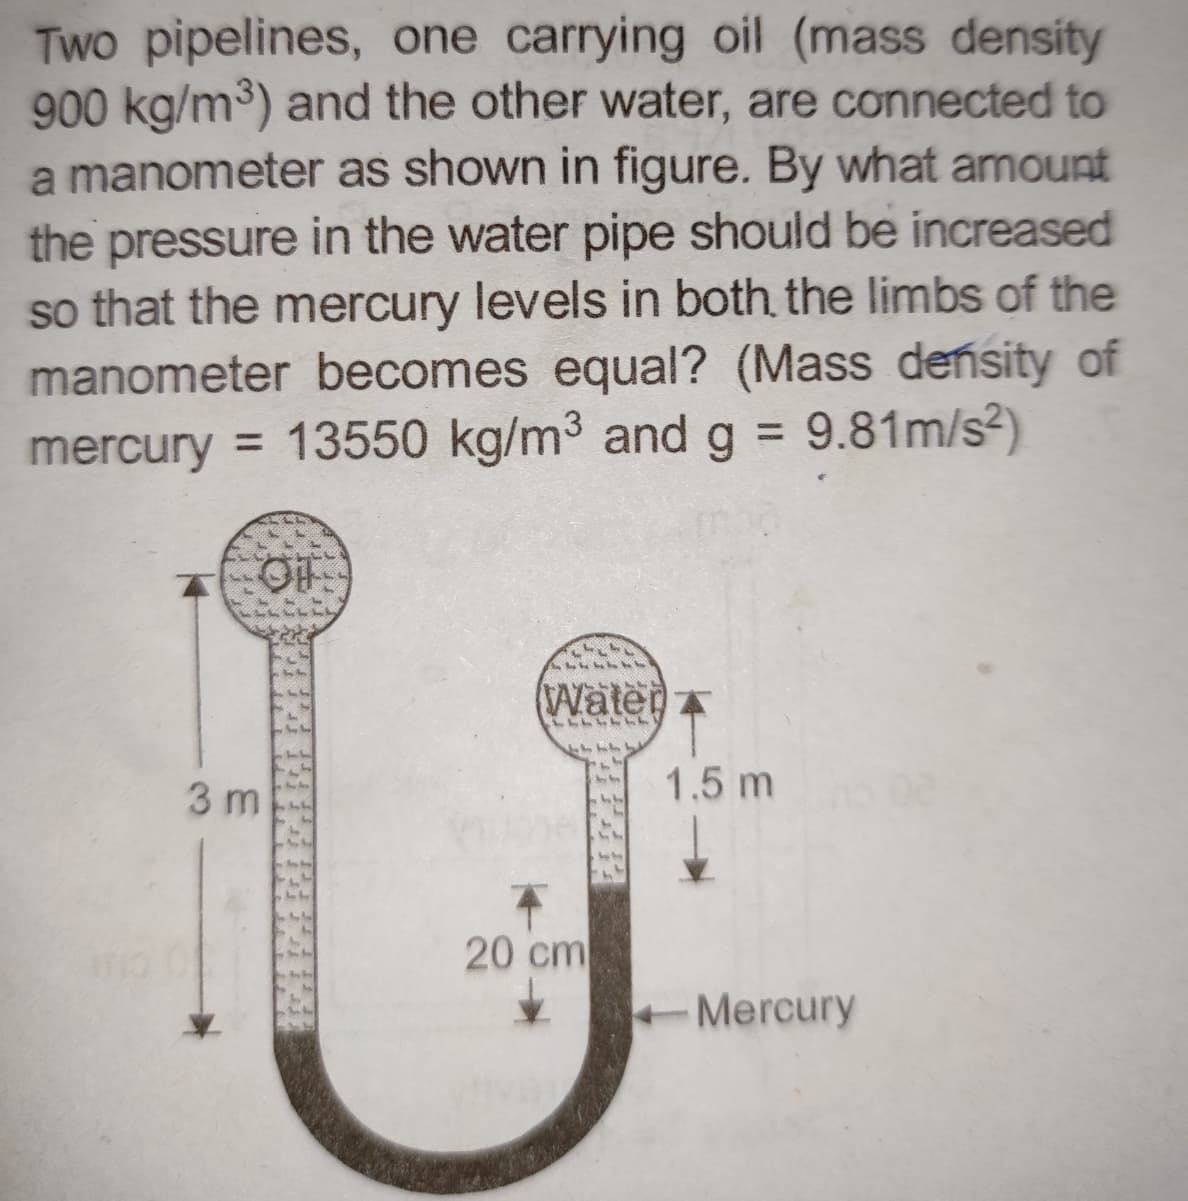 Two pipelines, one carrying oil (mass density
900 kg/m³) and the other water, are connected to
a manometer as shown in figure. By what amount
the pressure in the water pipe should be increased
so that the mercury levels in both the limbs of the
manometer becomes equal? (Mass density of
mercury = 13550 kg/m³ and g = 9.81m/s²)
OF
3 m
244
44
Water
LLLLLLL
20 cm
1.5 m
Mercury